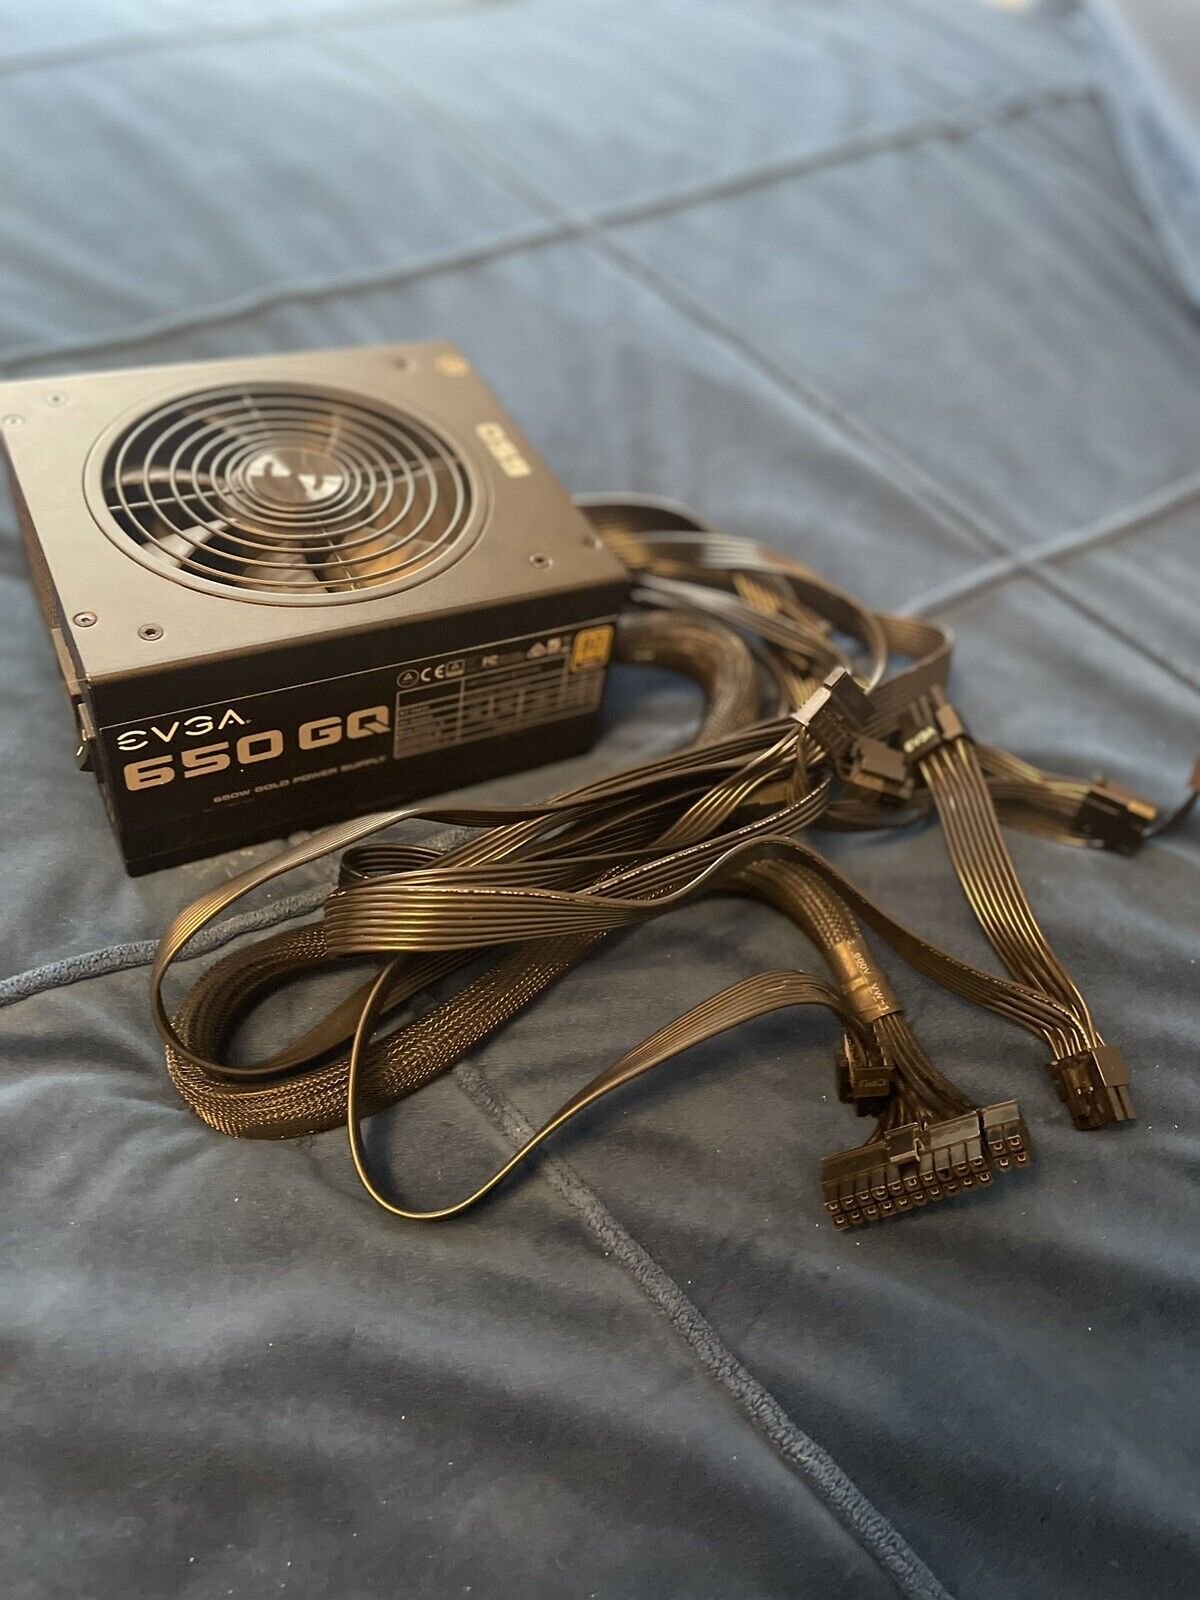 EVGA 650W Gq 80+ Gold Modular Power Supply With Original Cables